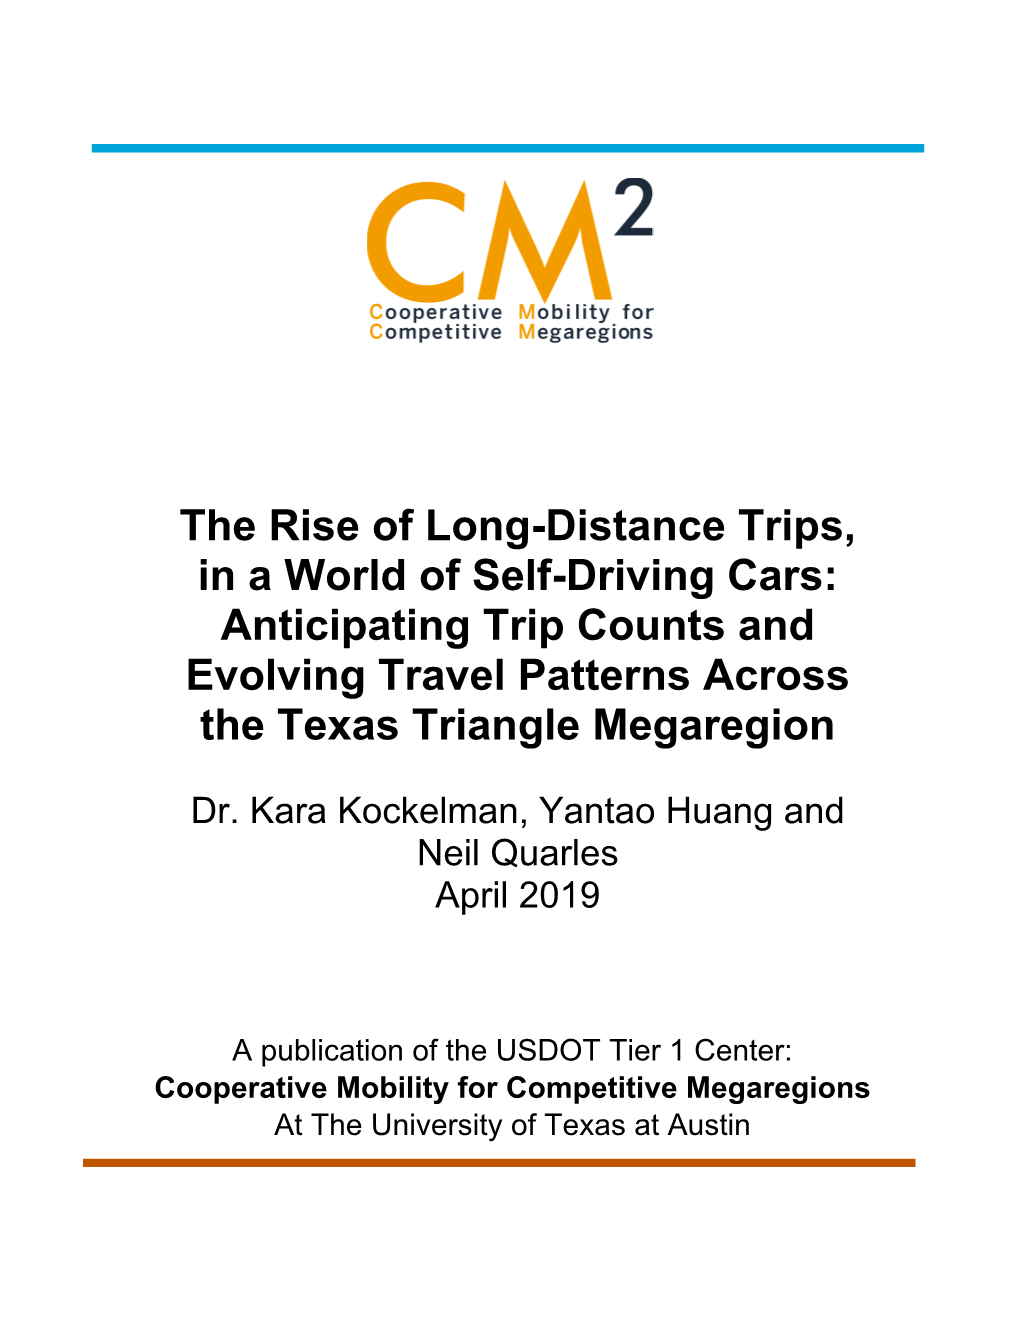 The Rise of Long-Distance Trips, in a World of Self-Driving Cars: Anticipating Trip Counts and Evolving Travel Patterns Across the Texas Triangle Megaregion